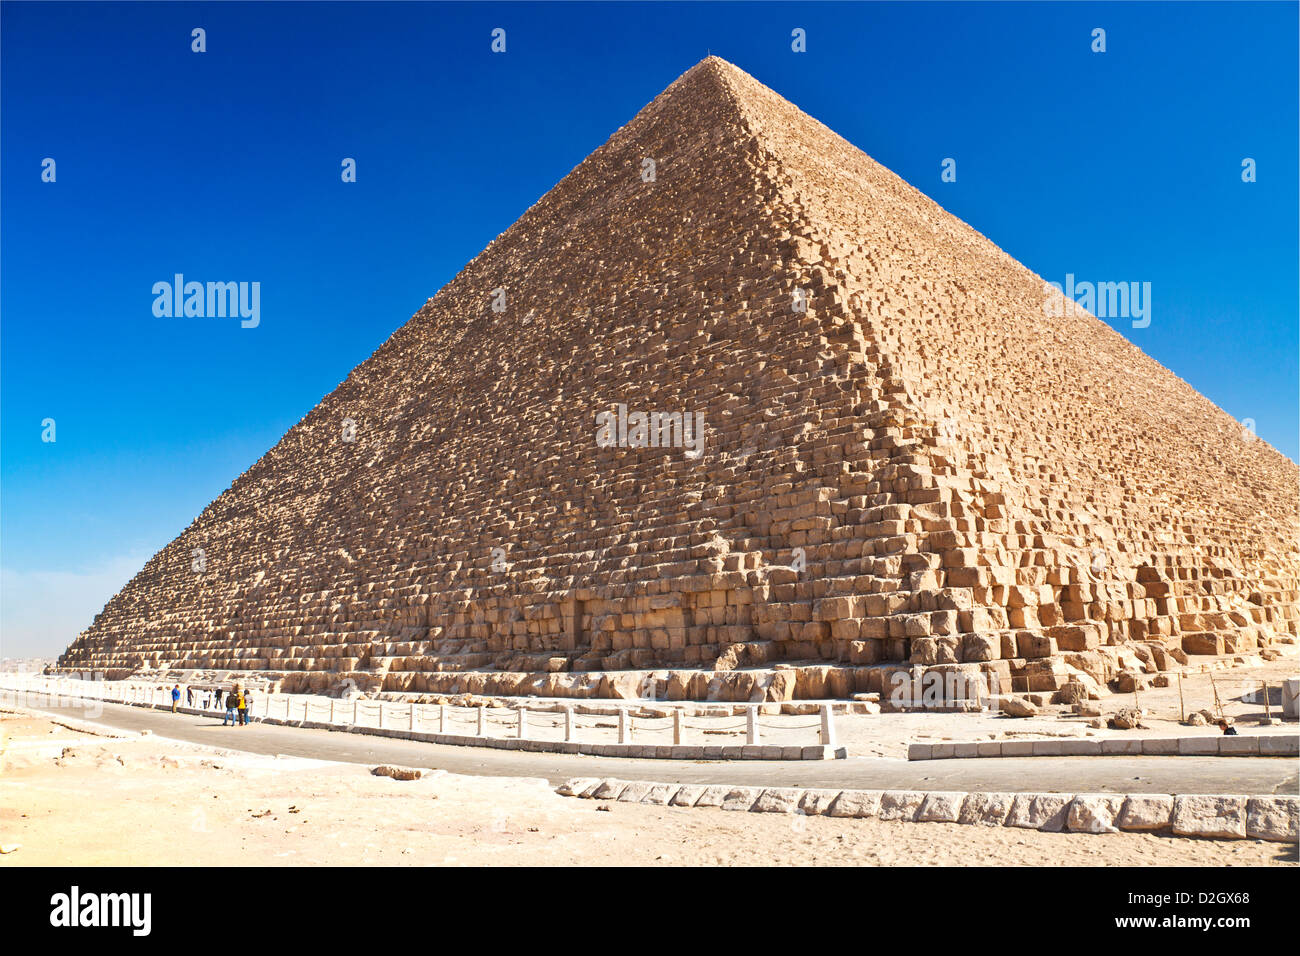 Great Pyramid,Pyramid of Khufu or Cheops, the oldest and largest of the three pyramids in the Giza Necropolis near Cairo, Egypt. Stock Photo